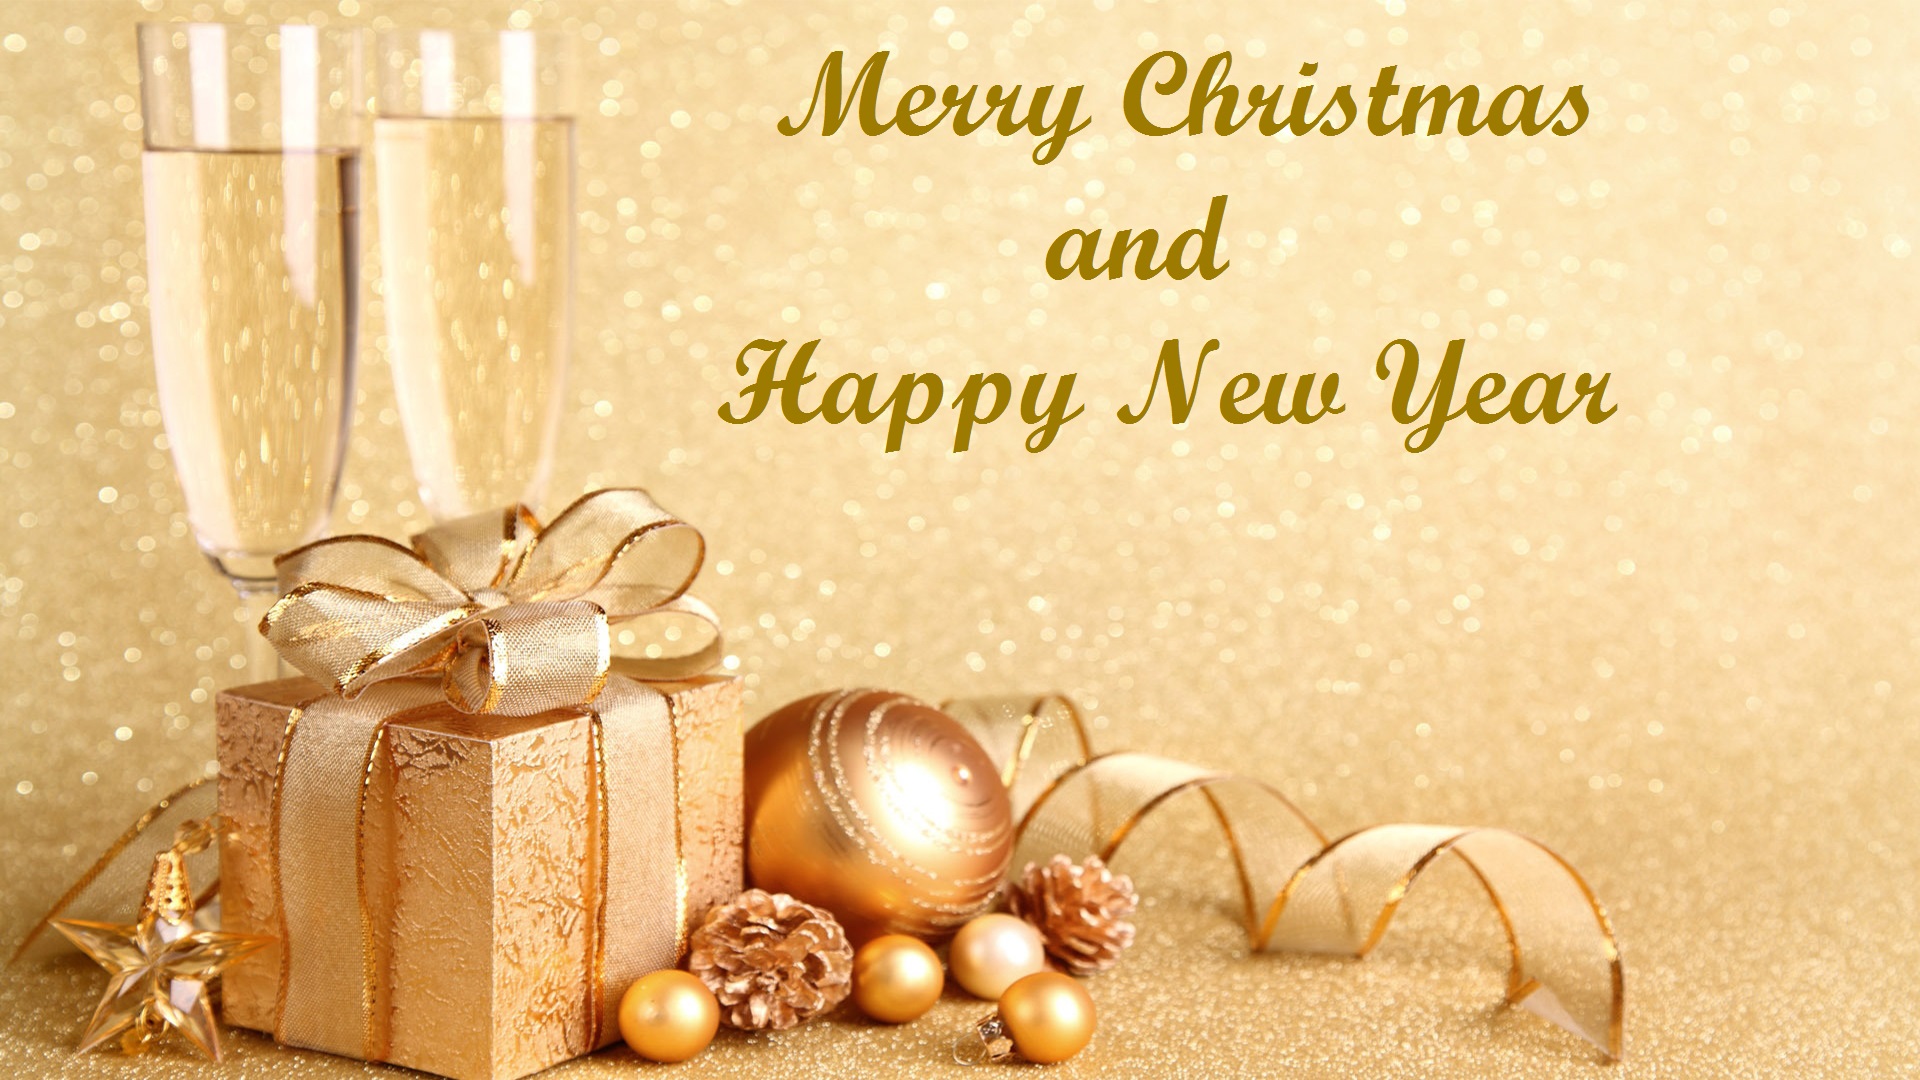 Merry Christmas & Happy New Year image